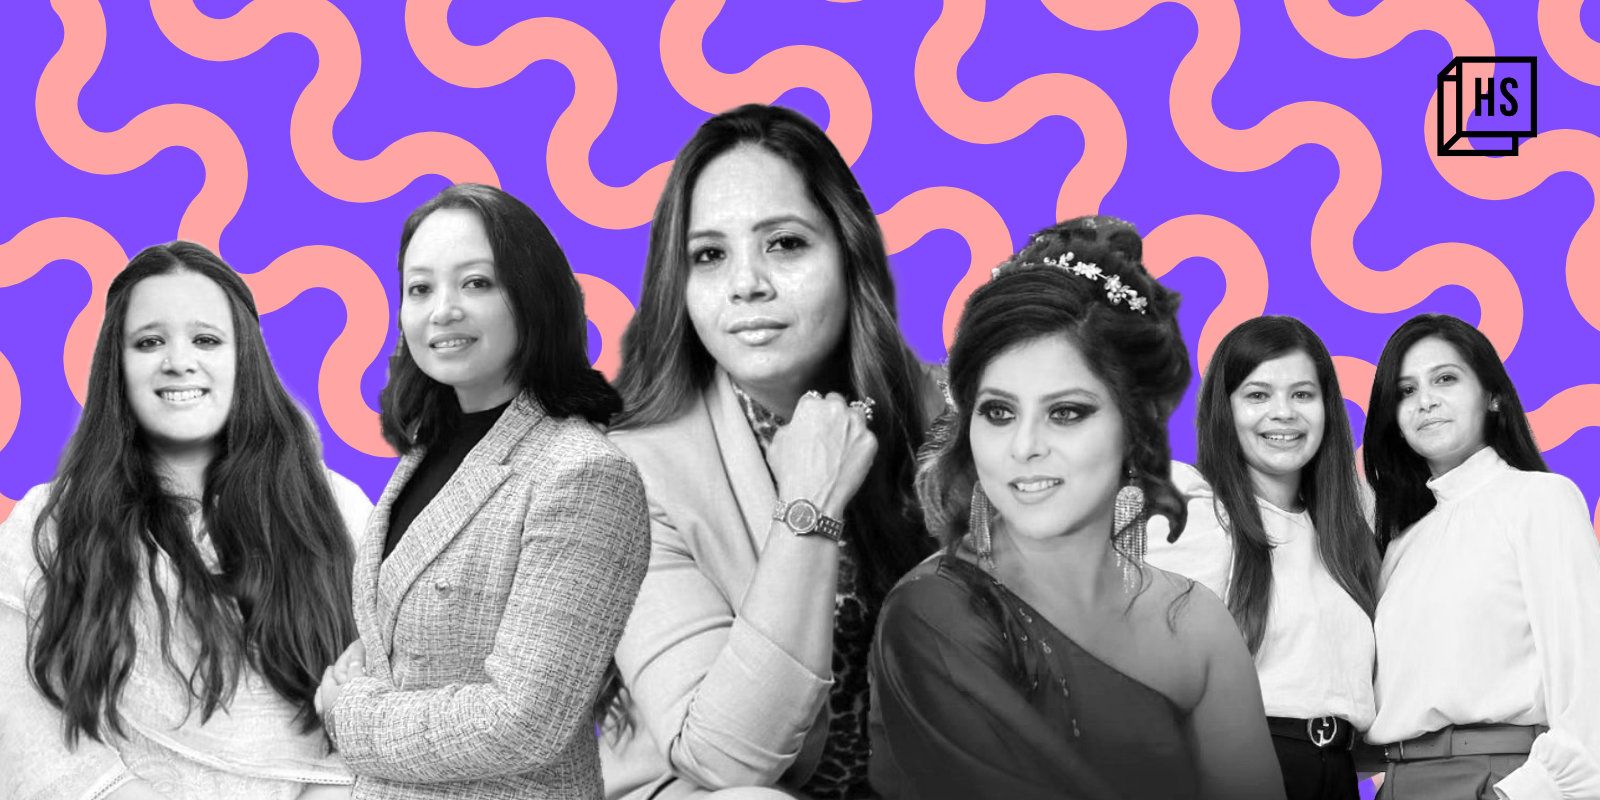 These 8 women-led startups are driving change by offering innovative products and services 